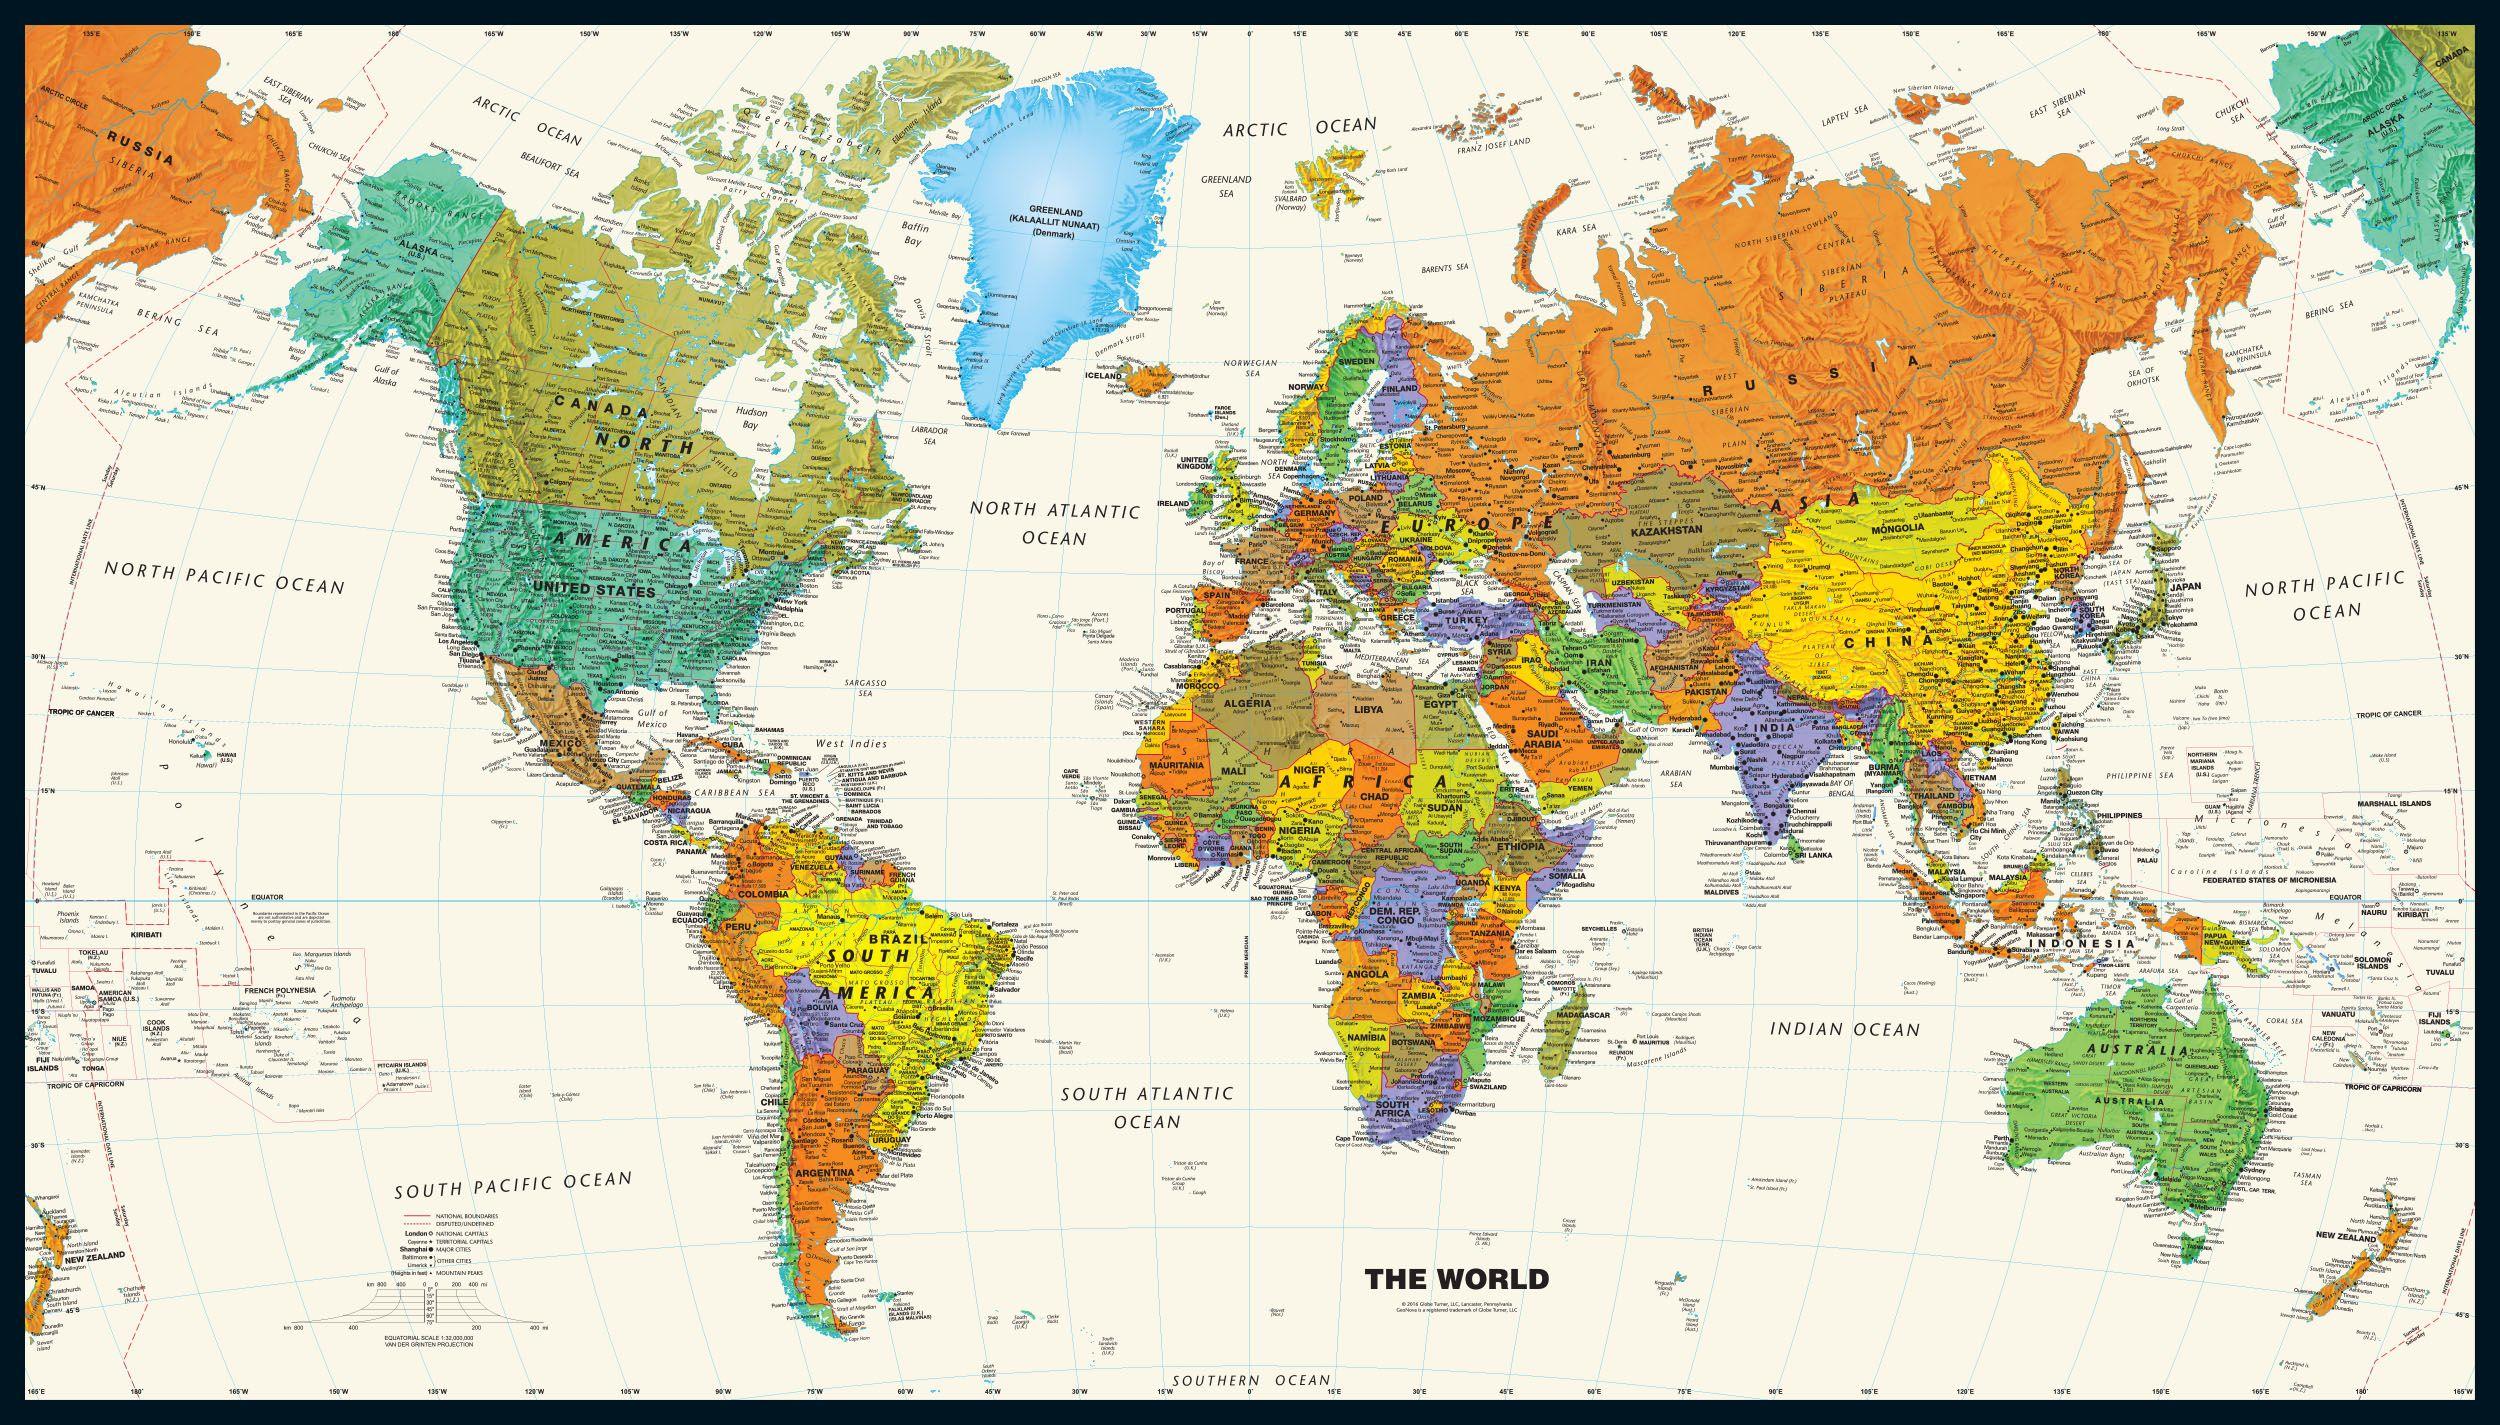 Wallpapers Contemporary World Wall Map On High Quality Pictures Of